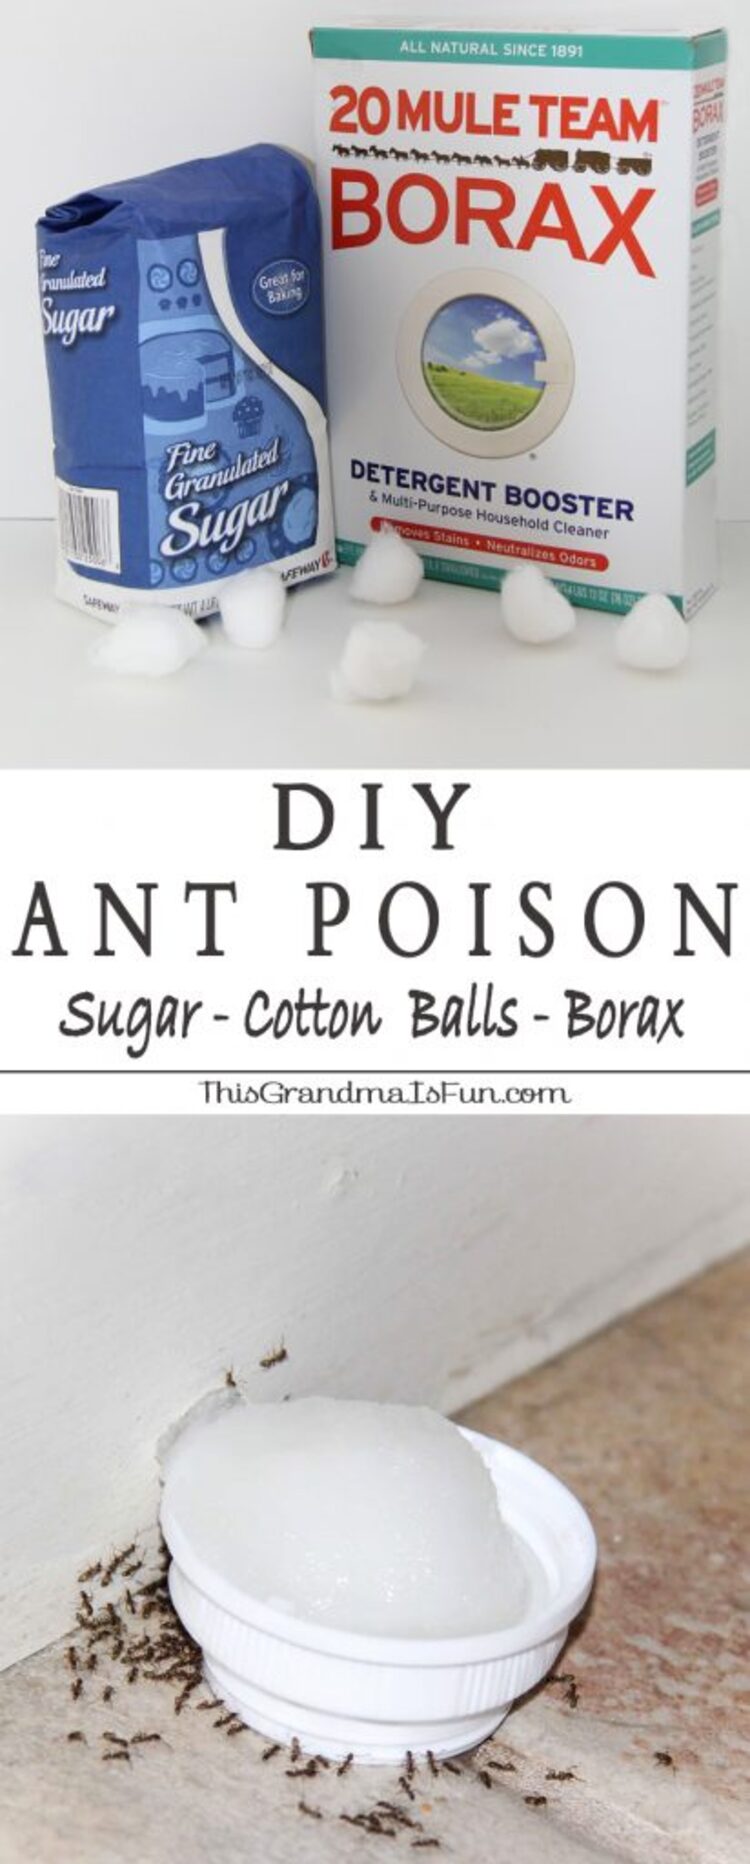 https://www.thisgrandmaisfun.com/wp-content/uploads/2021/08/1-Poison-Ant-DIY-Collage-Image-Box-of-Borax-next-to-bog-of-sugar-bowl-of-homemade-ant-killer-surrounded-by-ants.jpg